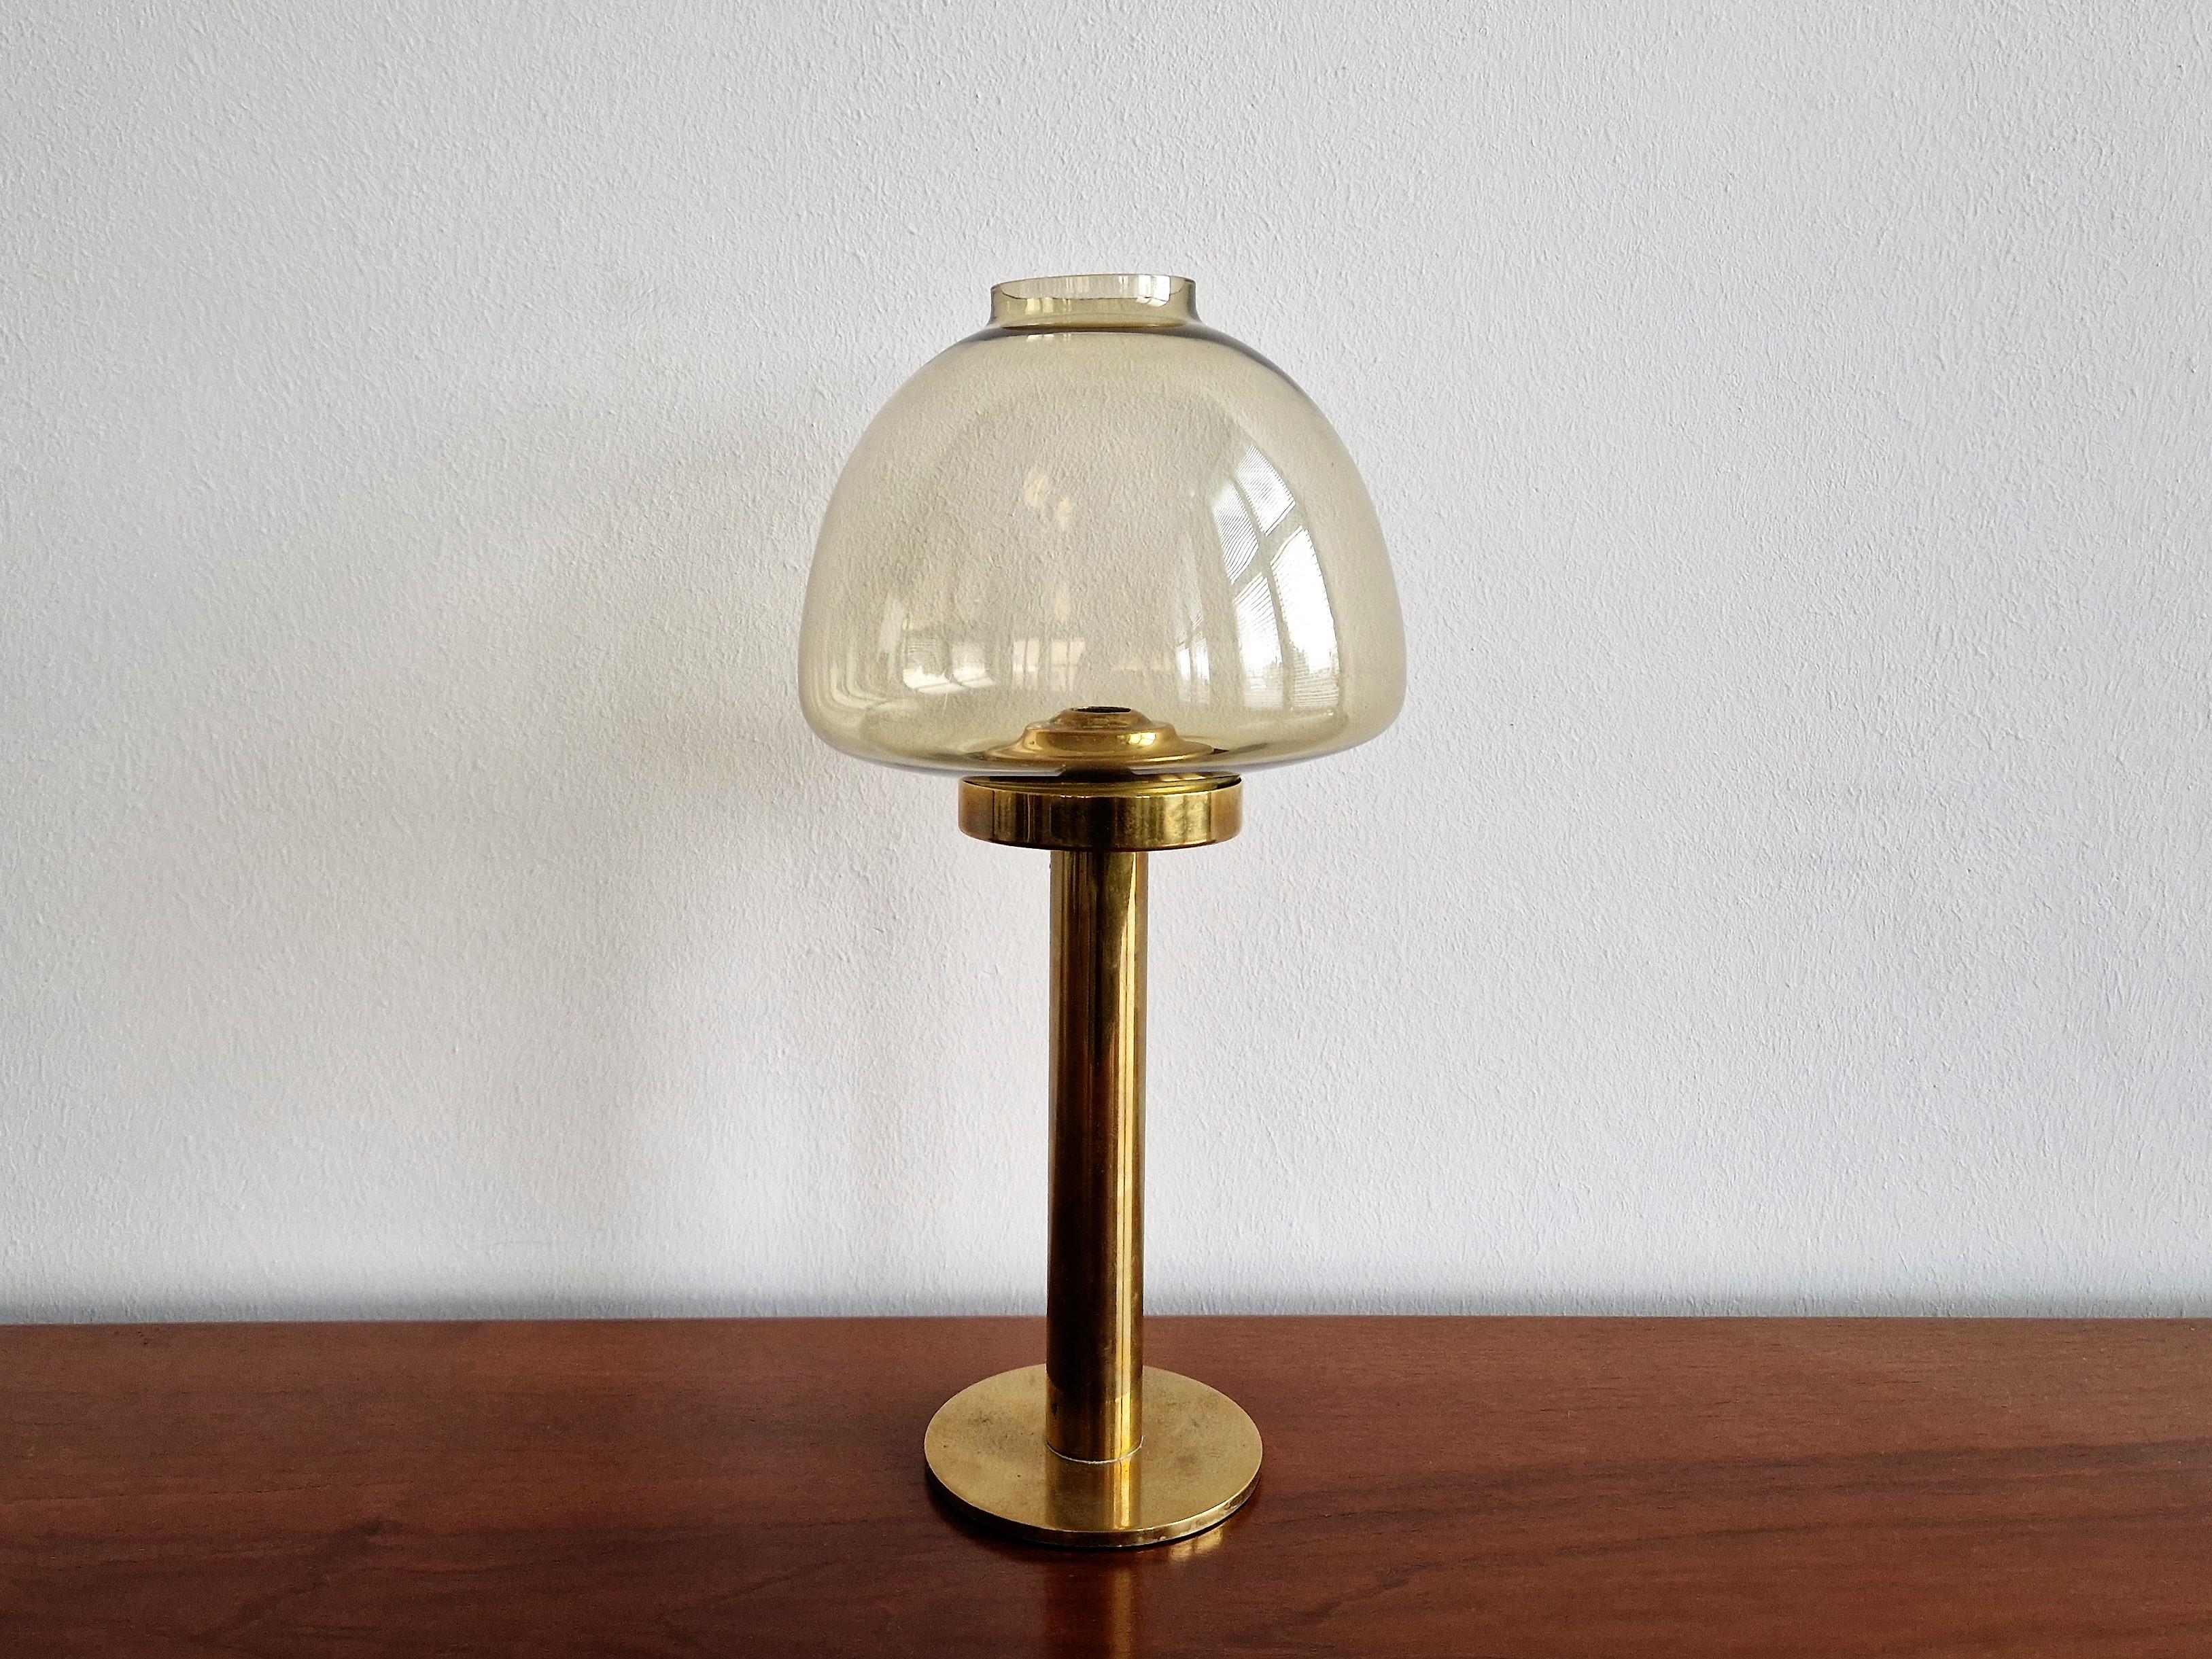 This beautiful and decorative candleholder, model L102/32, was designed by Hans Agne Jakobsson for Markaryd. It has a mouth-blown glass shade and a brass base. All in a good condition with smaller signs of age and use.